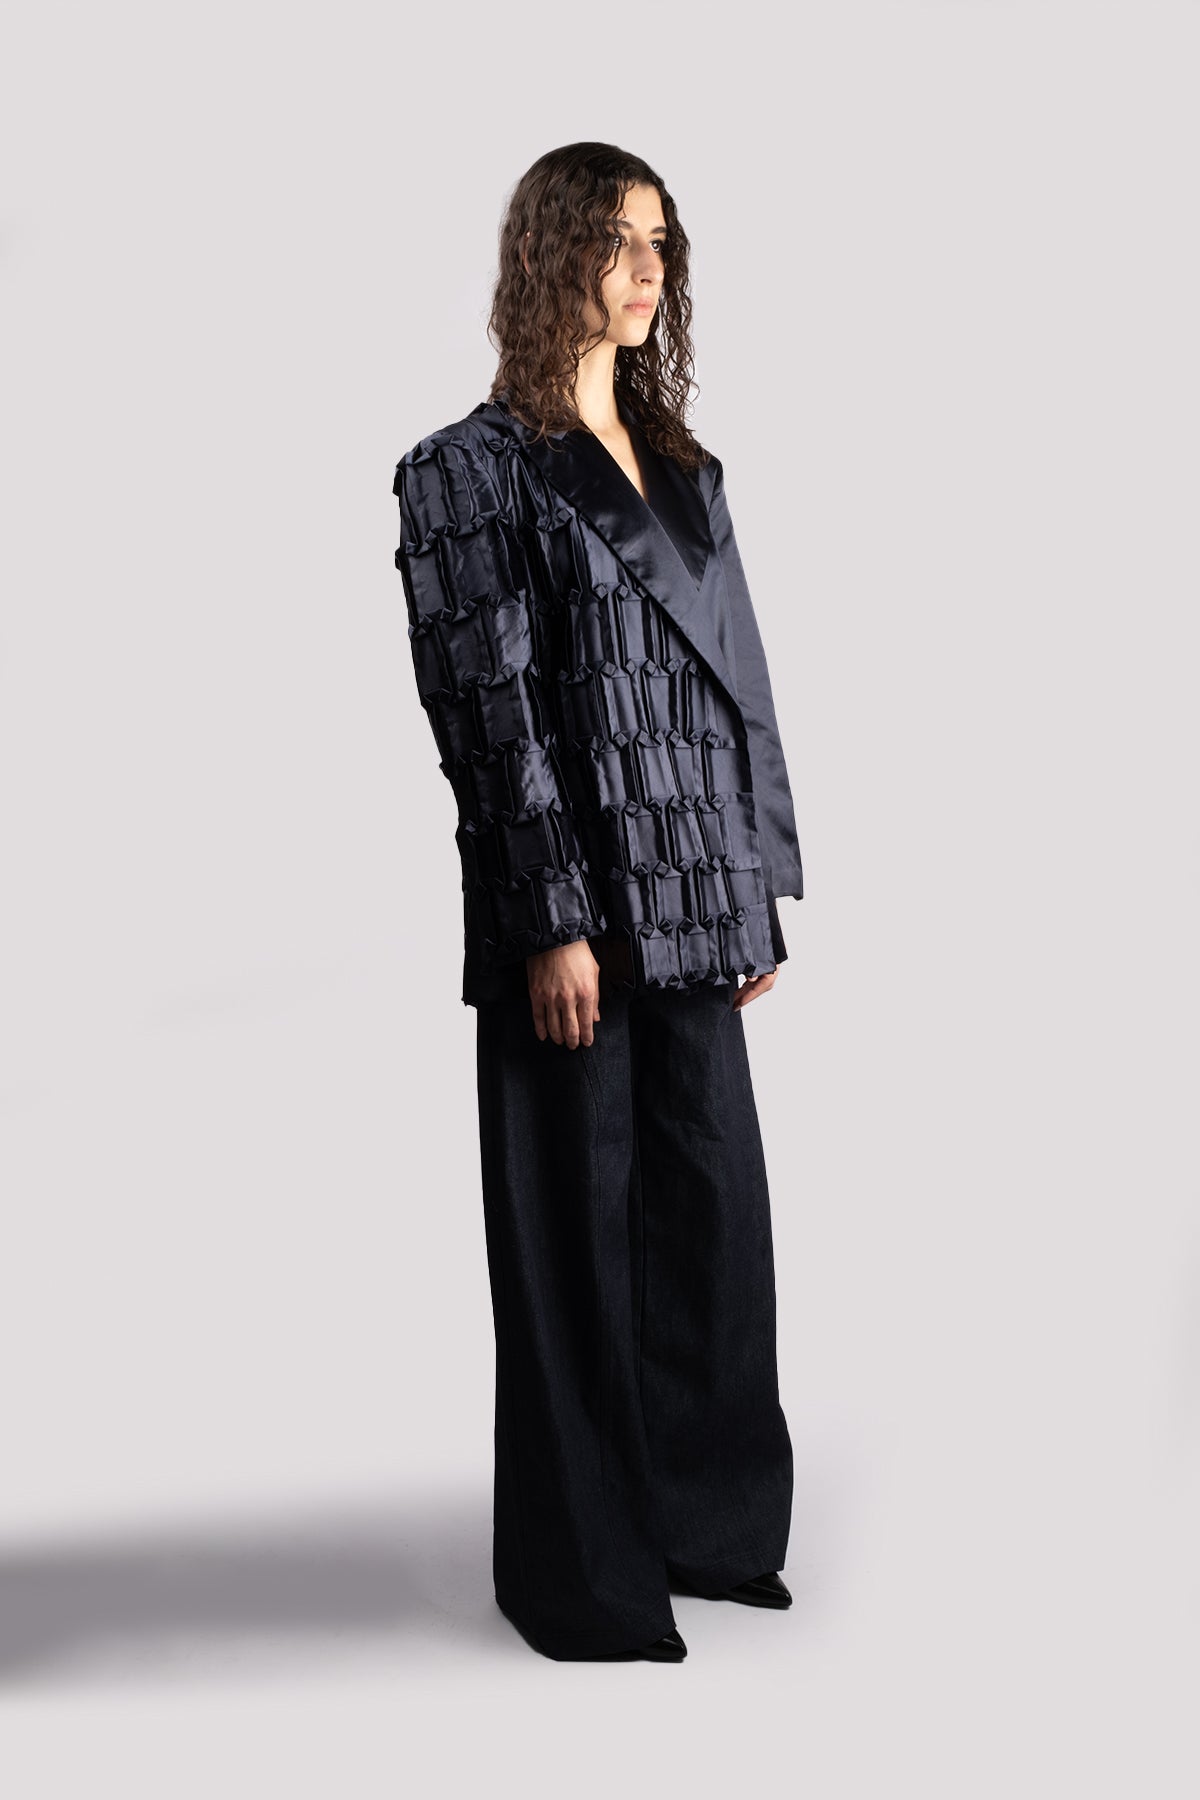 Oversized jacket in hand-crafted pleats